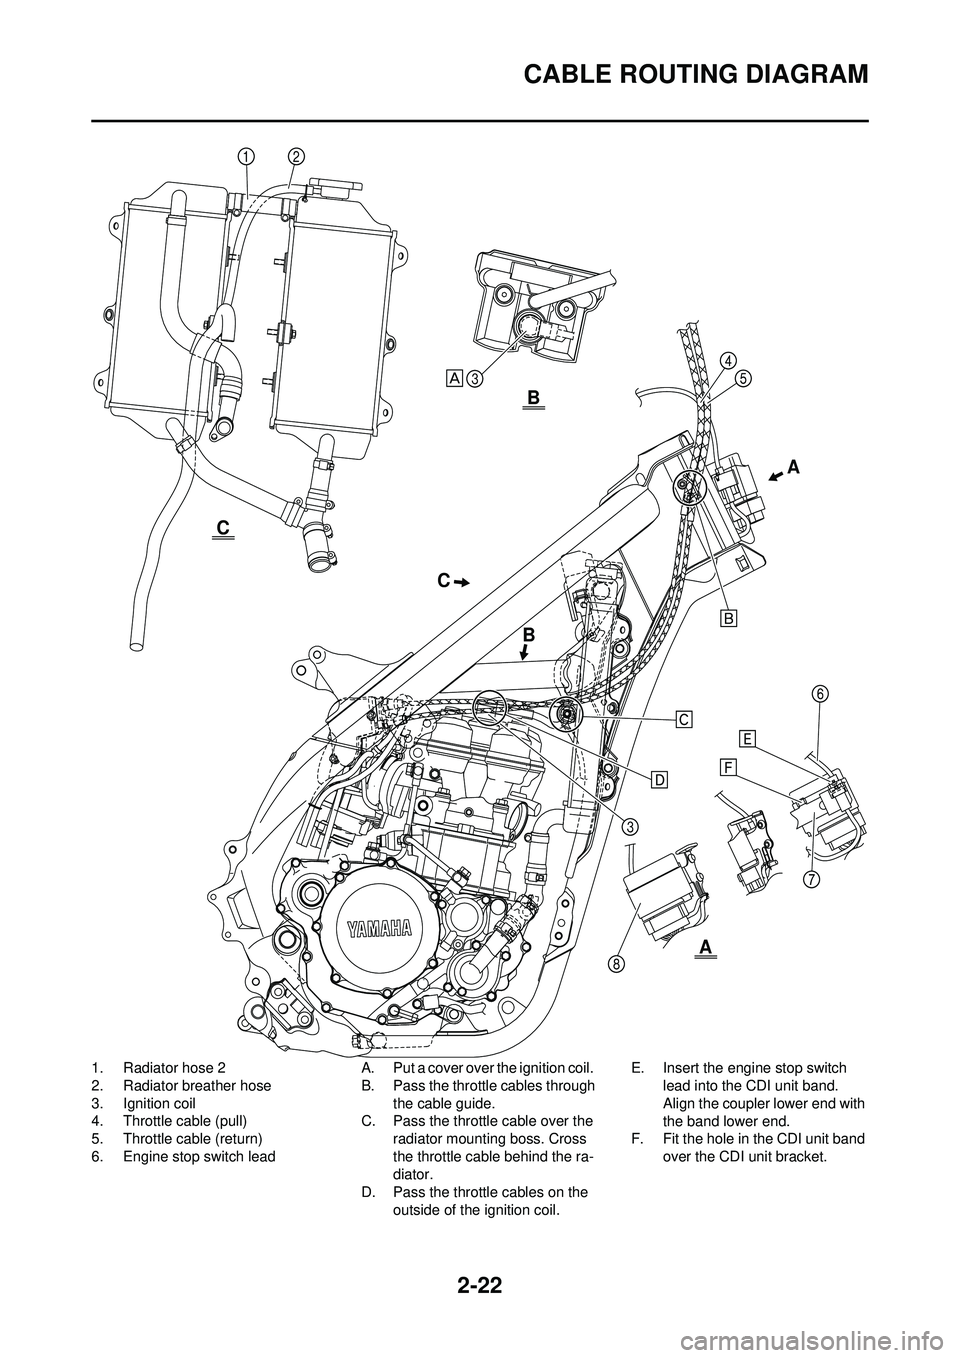 YAMAHA YZ250F 2010  Owners Manual 2-22
CABLE ROUTING DIAGRAM
1. Radiator hose 2
2. Radiator breather hose
3. Ignition coil
4. Throttle cable (pull)
5. Throttle cable (return)
6. Engine stop switch leadA. Put a cover over the ignition 